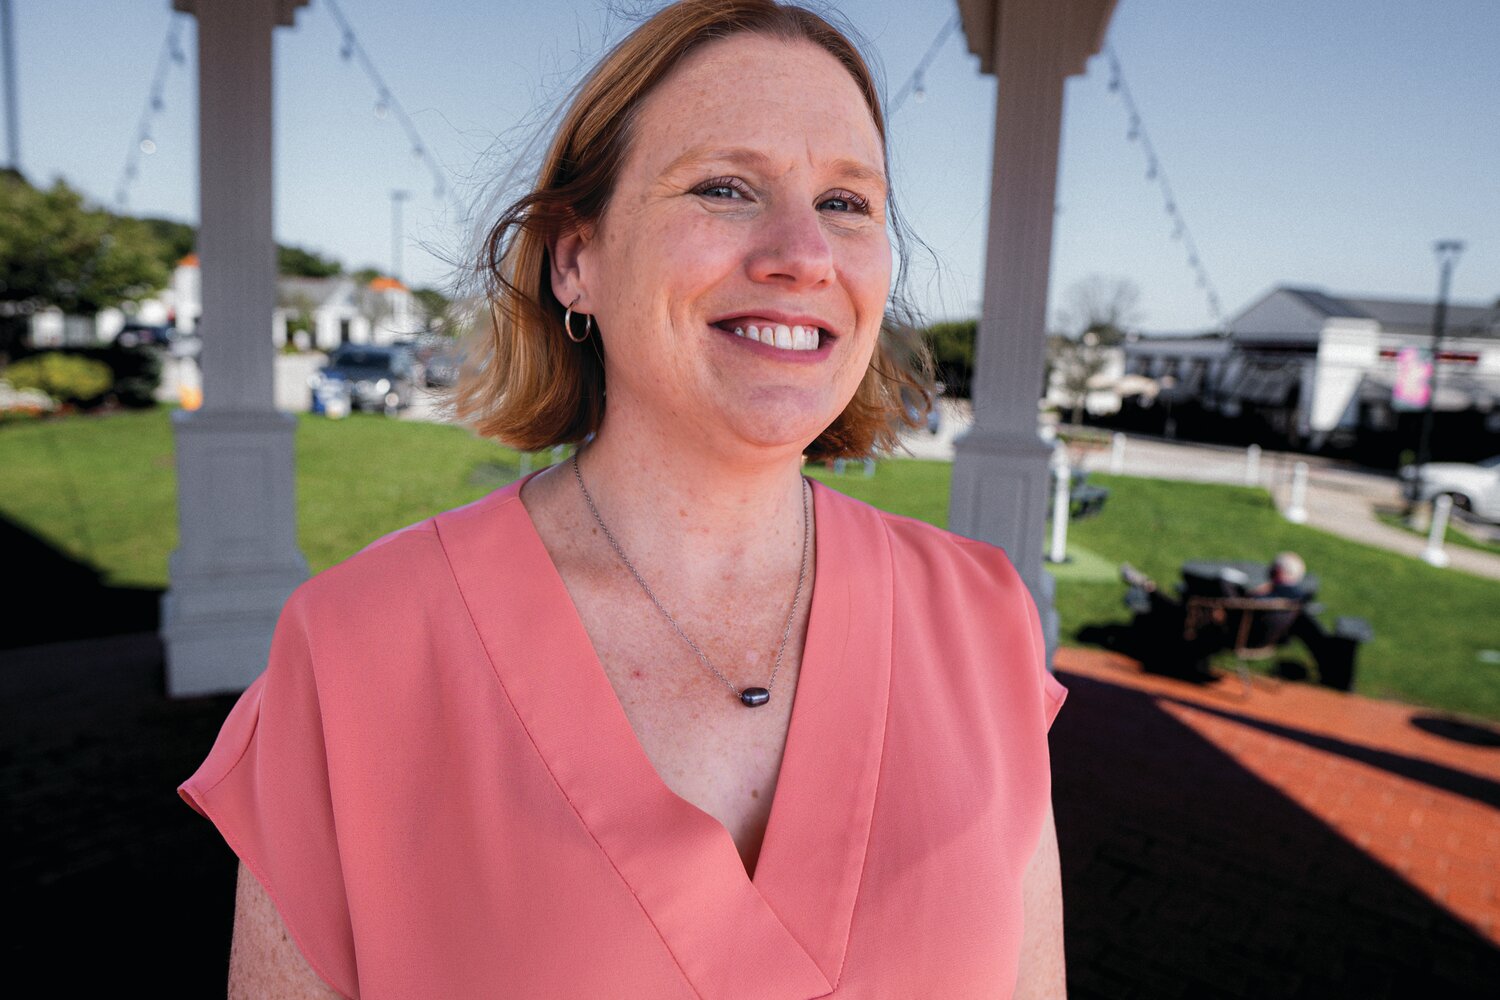 Rachel McNally: A full-time realtor, part-time educator, current volunteer for the Oaklawn Grange, and mother of three who loves to stay active in her community. (Photo by Tim McFate, courtesy of the OneCranston HEZ)